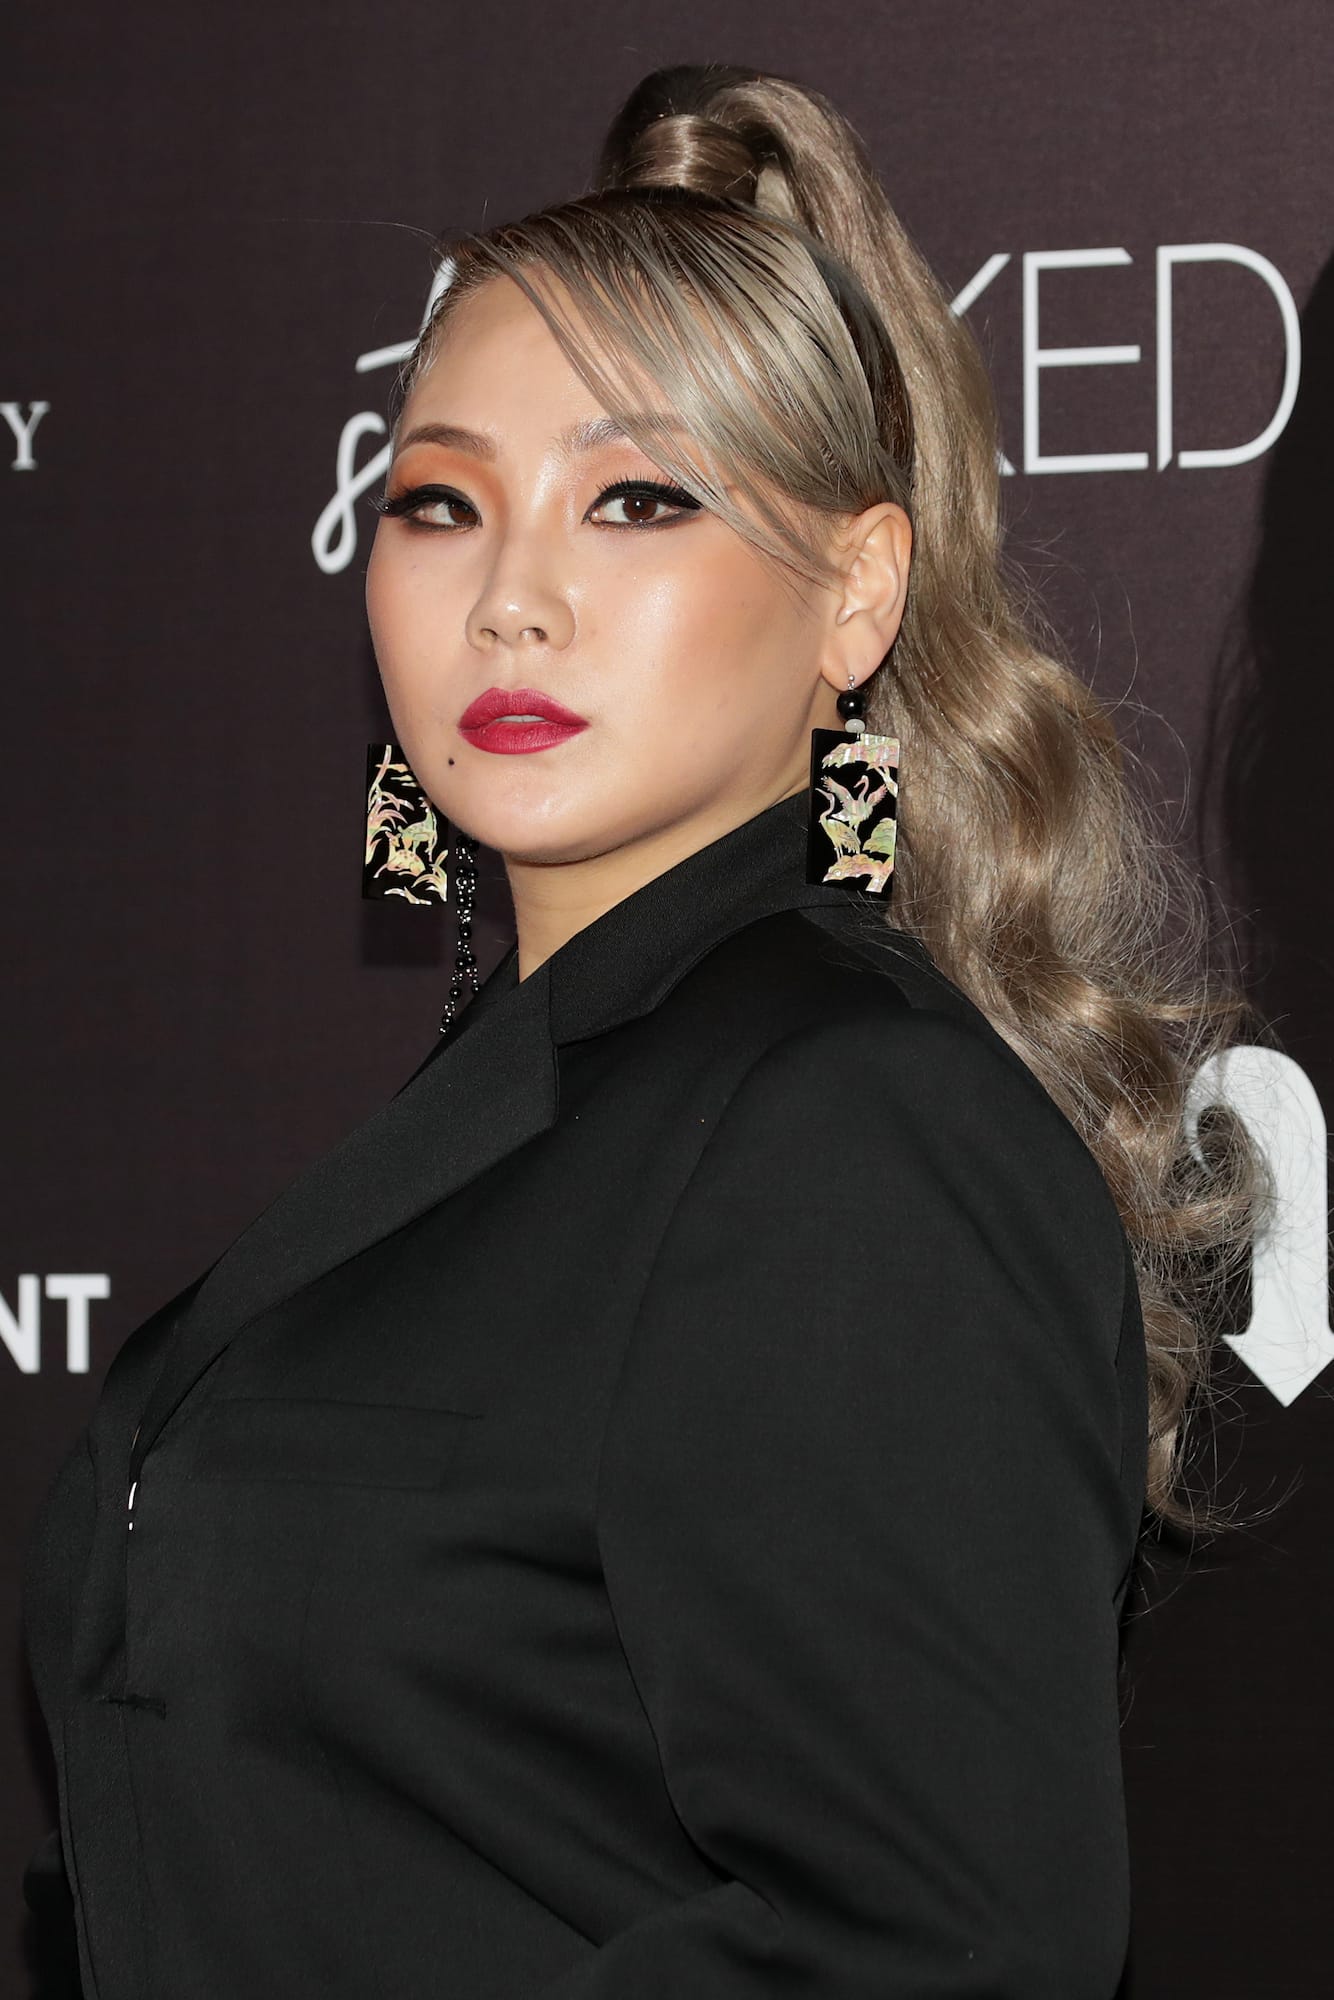 CL Leaves YG Entertainment Contract 